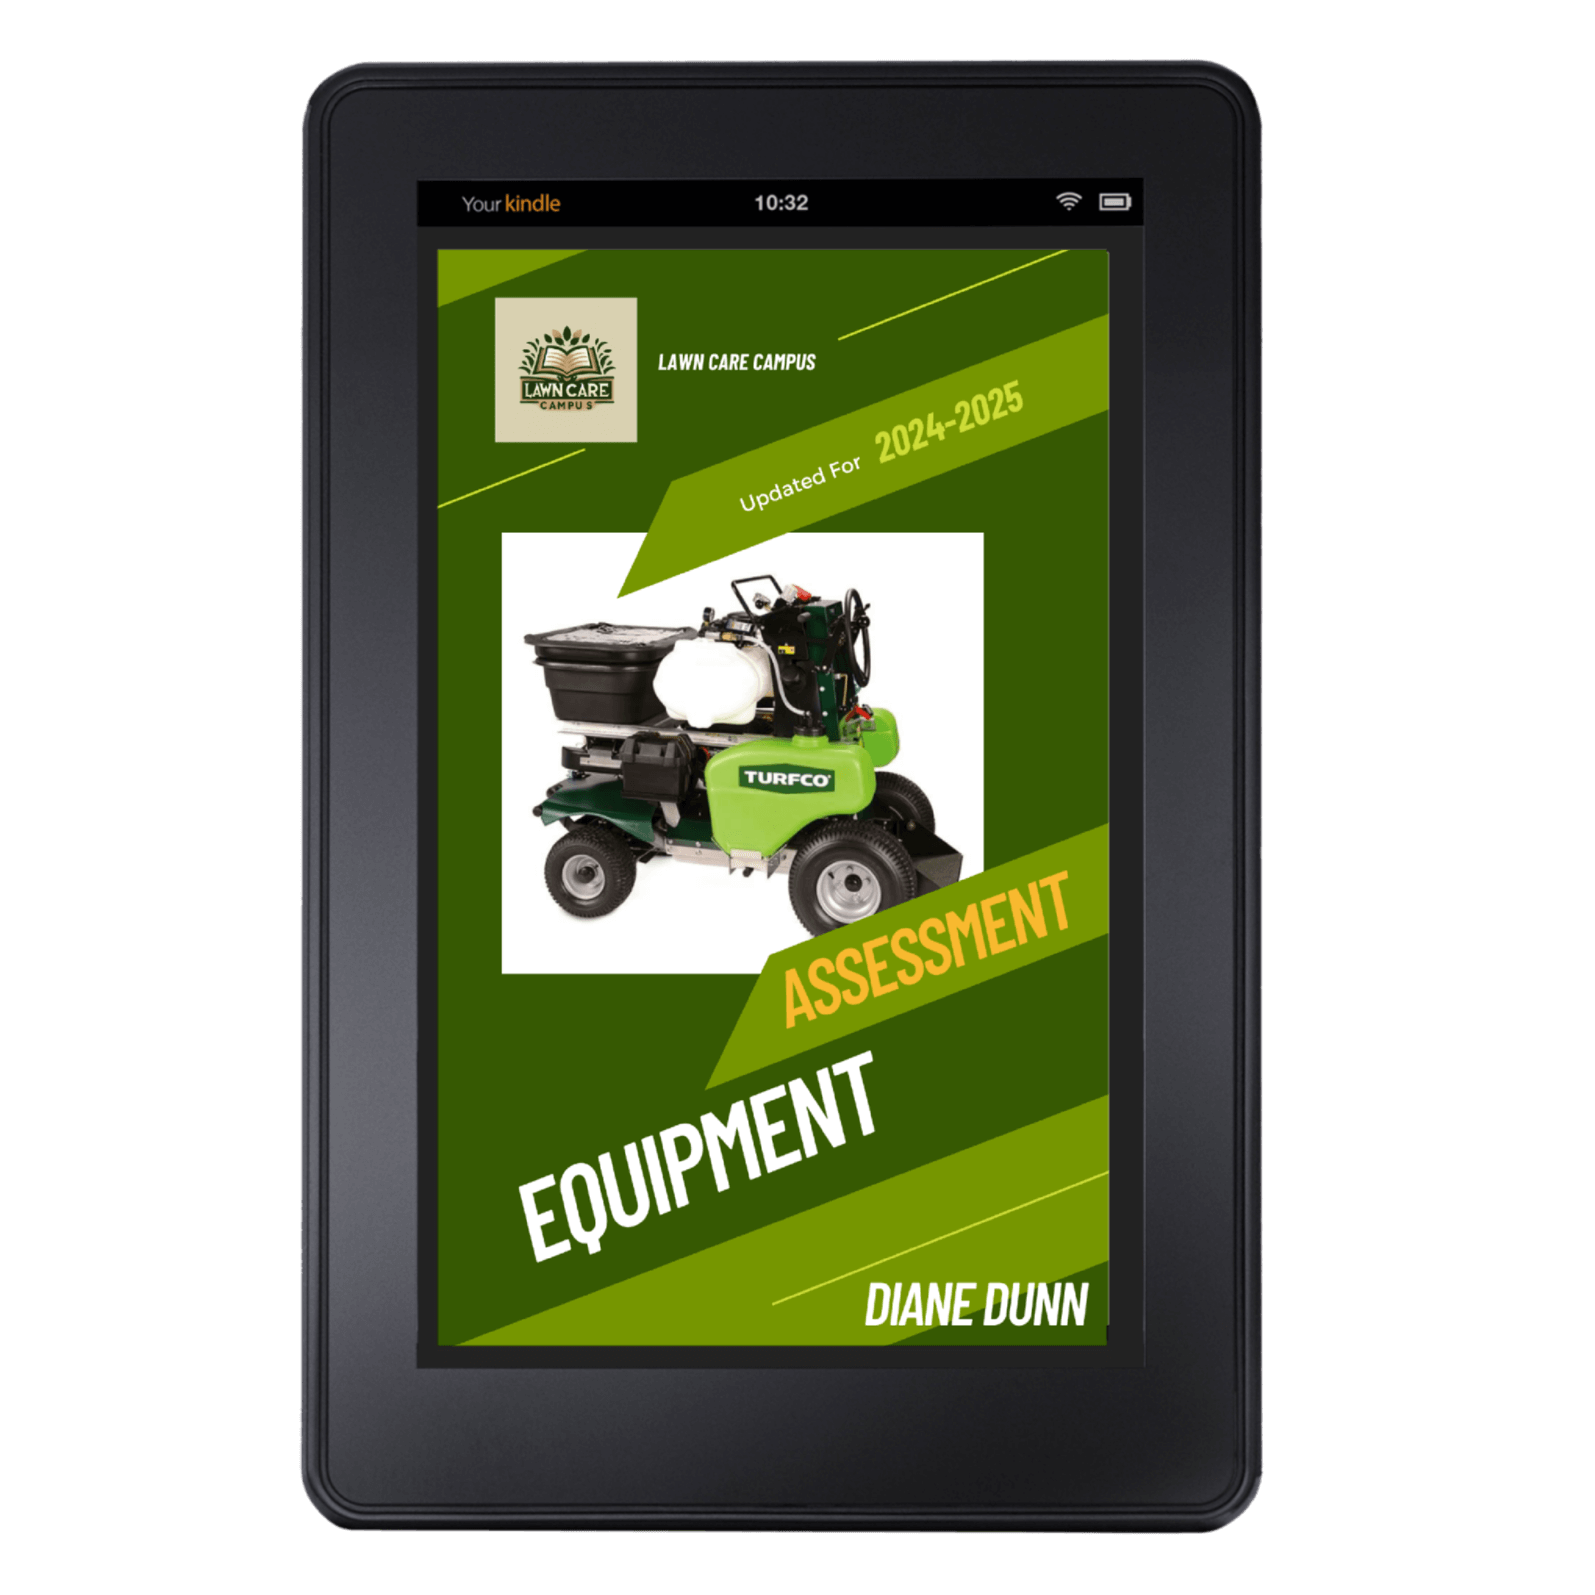 Lawn Care equpment assessment